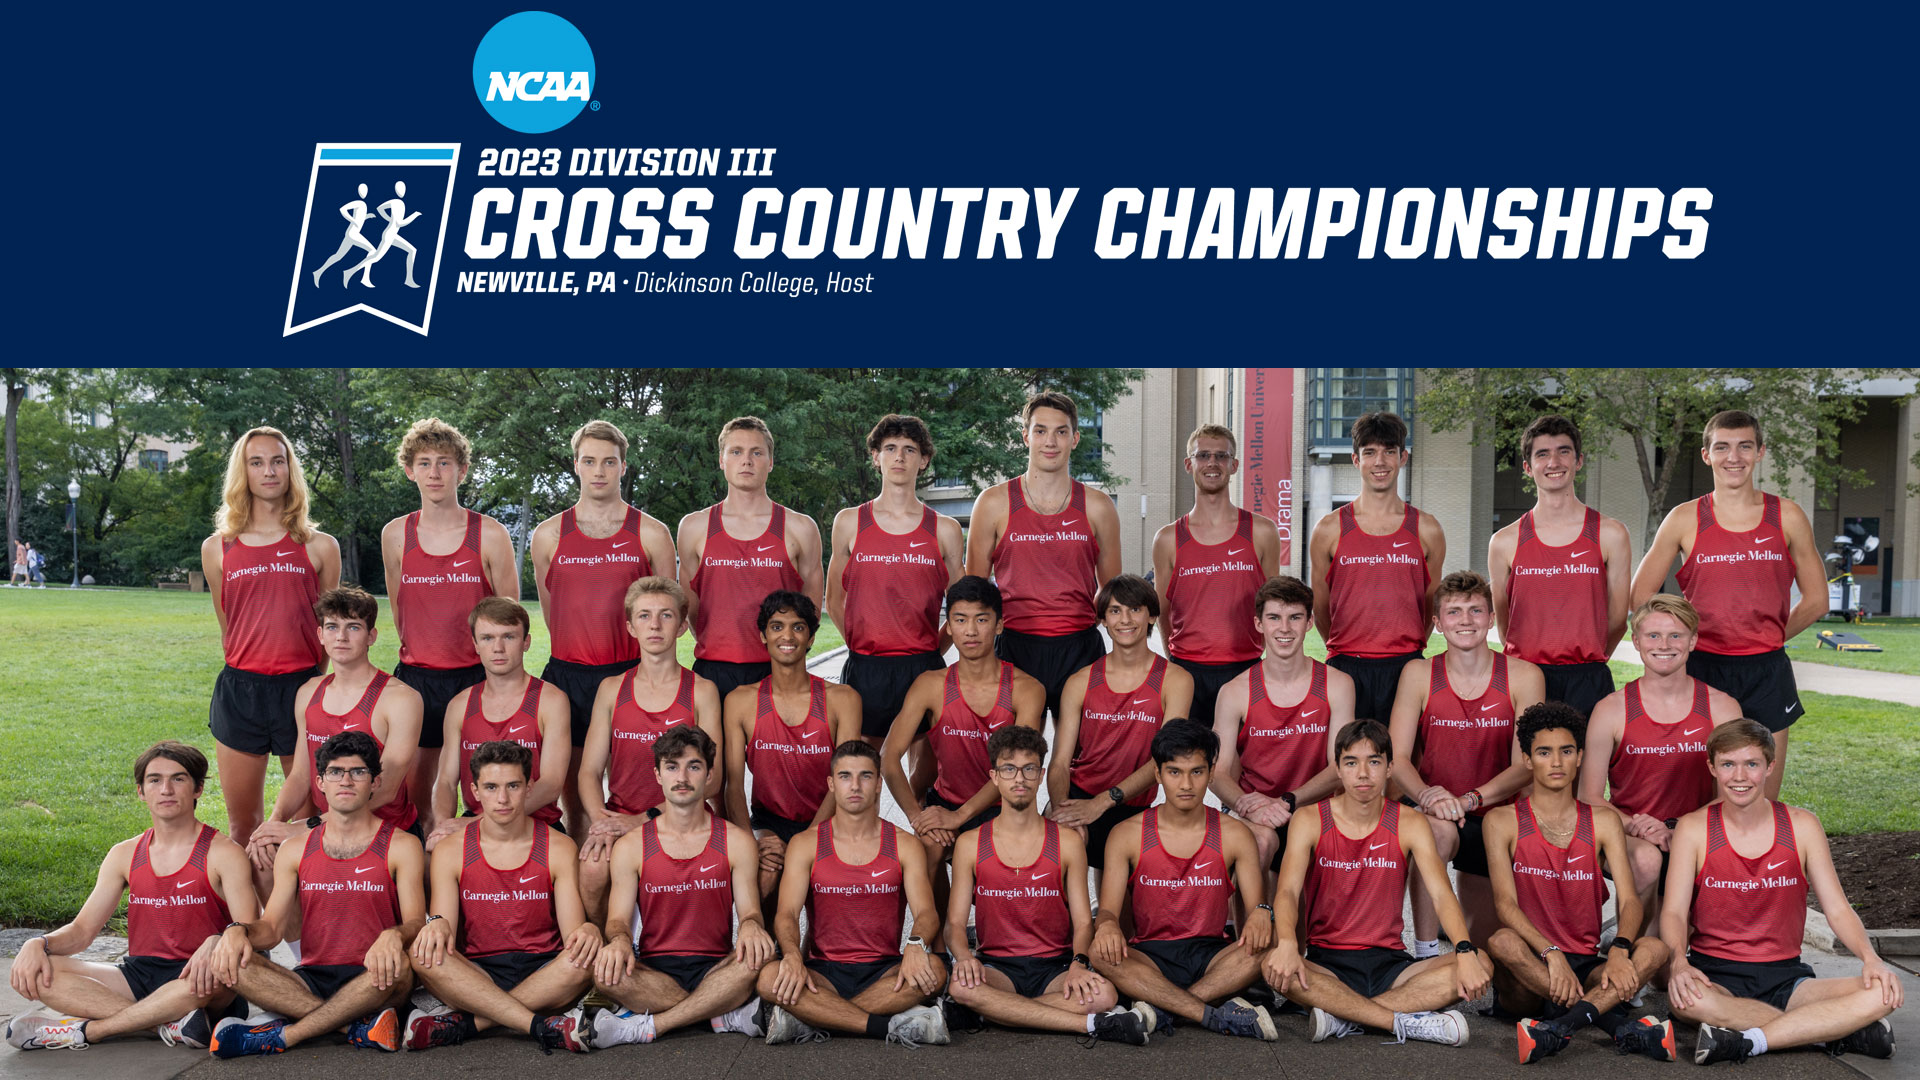 team photo of men's cross country team wearing red jersey tops with NCAA logo reading 2023 Division III Cross Country Championships